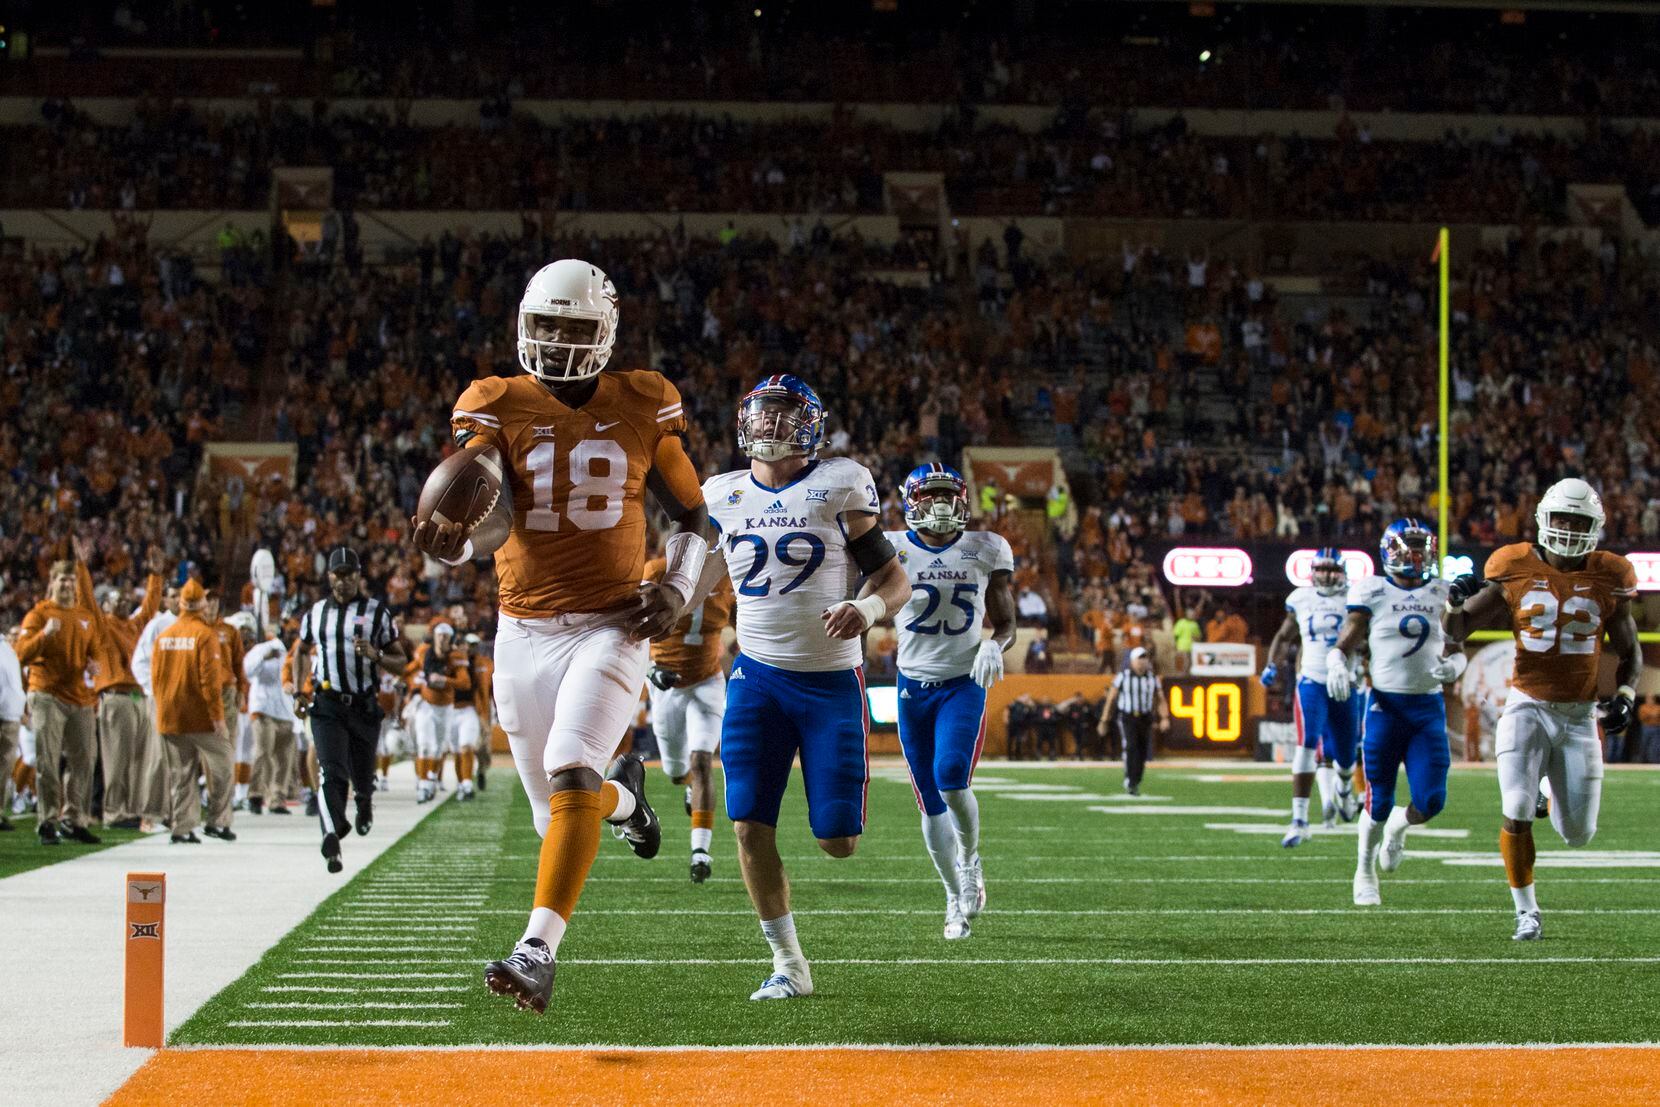 AUSTIN, TX - NOVEMBER 7:  Tyrone Swoopes #18 of the Texas Longhorns scrambles for a 44 yard touchdown against the Kansas Jayhawks during the 4th quarter on November 7, 2015 at Darrell K Royal-Texas Memorial Stadium in Austin, Texas.  (Photo by Cooper Neill/Getty Images)